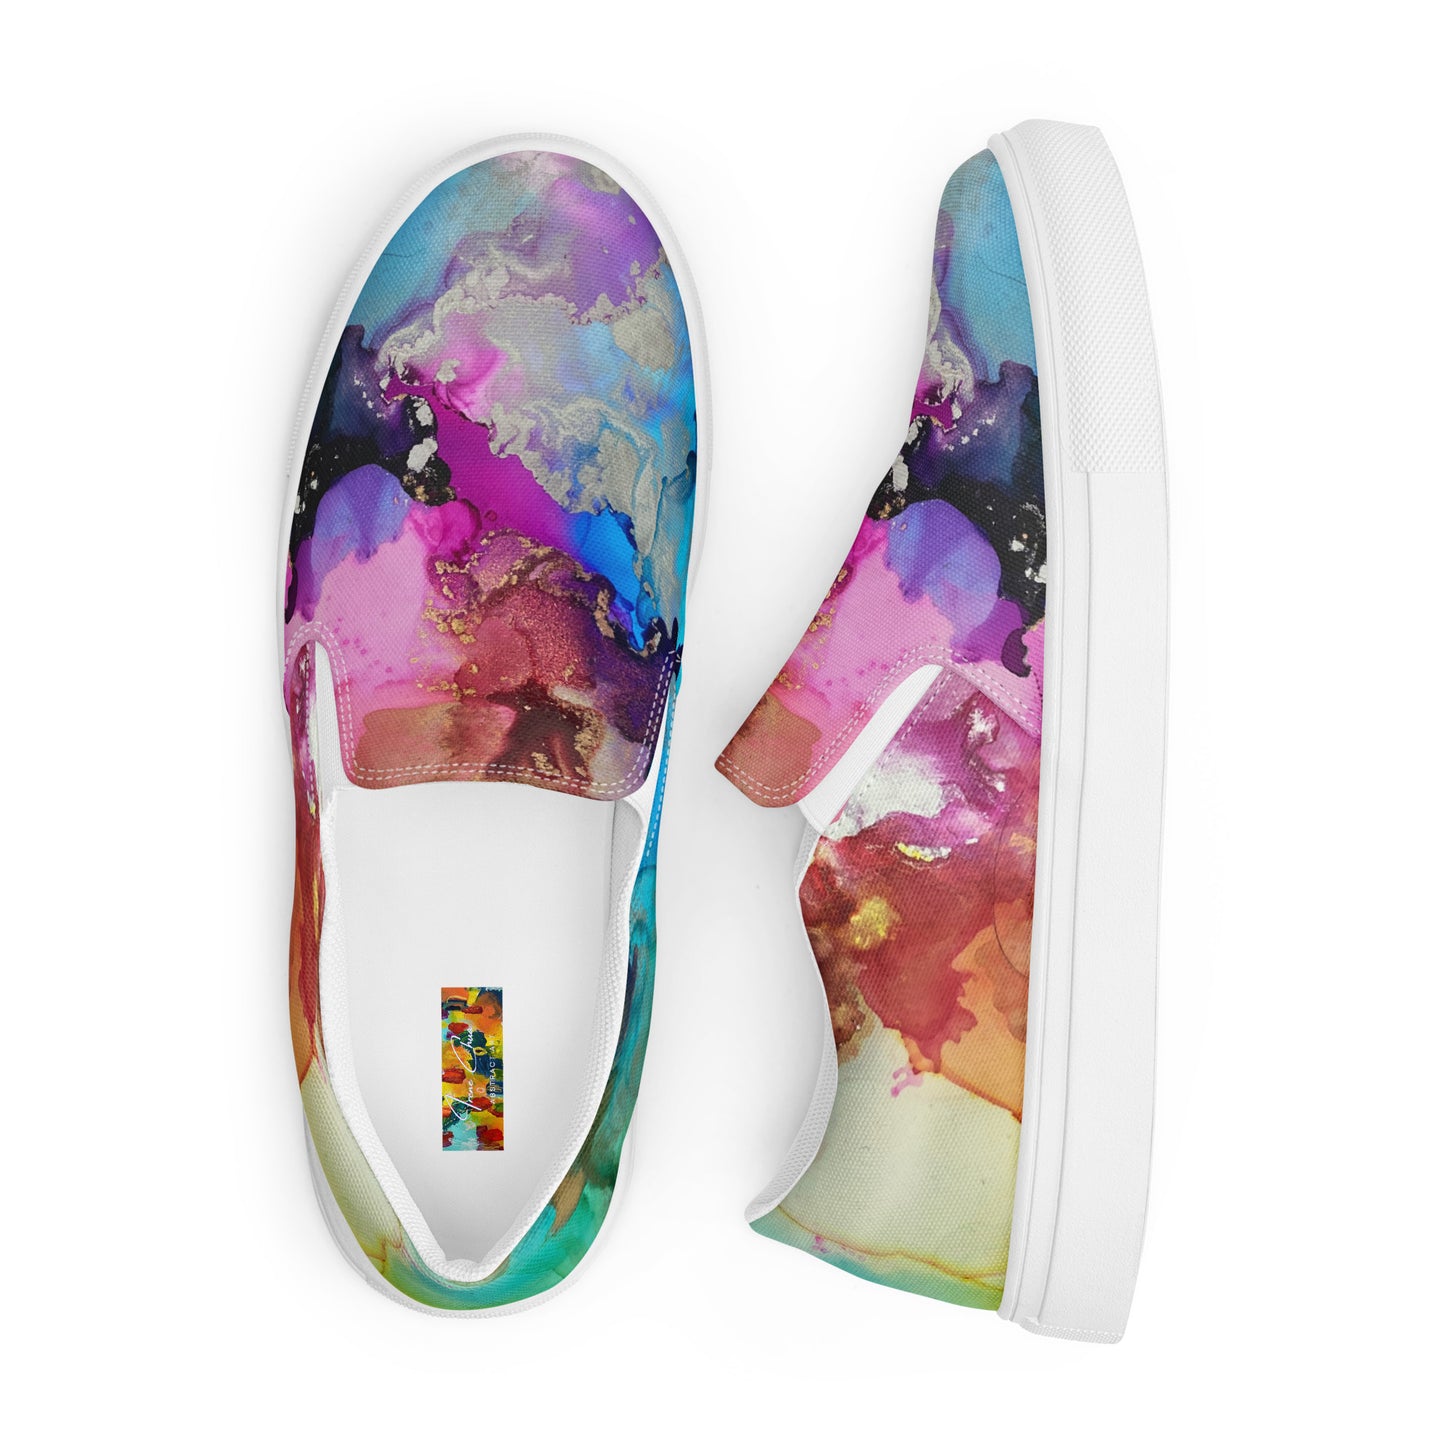 Blooms Women’s Slip-on Canvas Shoes